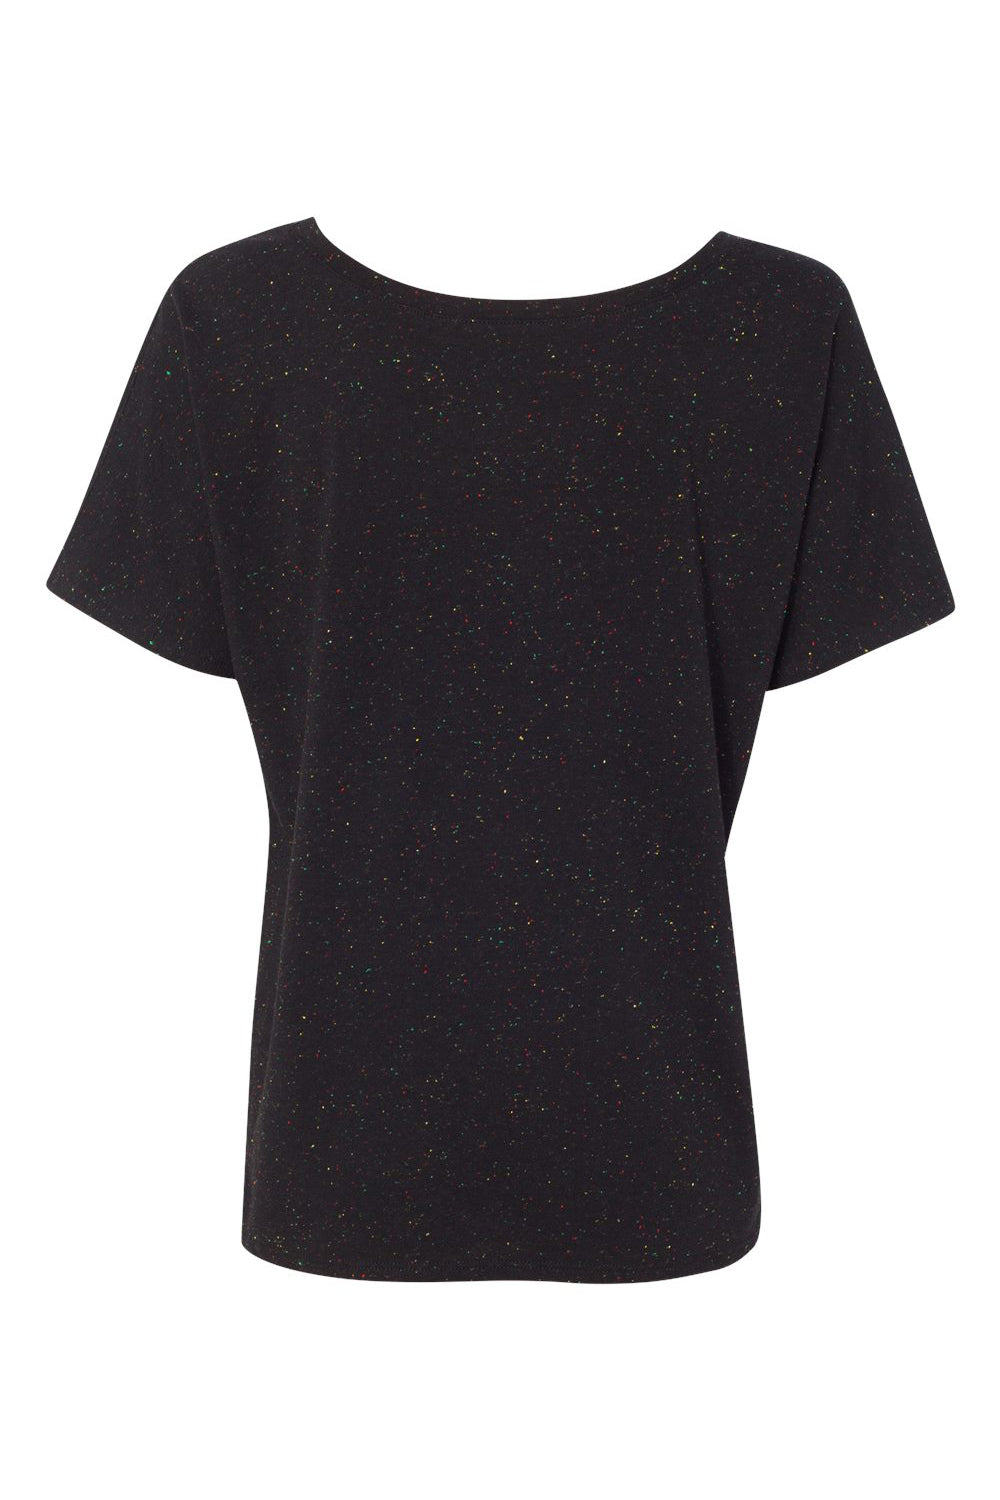 Bella + Canvas BC8816/8816 Womens Slouchy Short Sleeve Wide Neck T-Shirt Black Speckled Flat Back